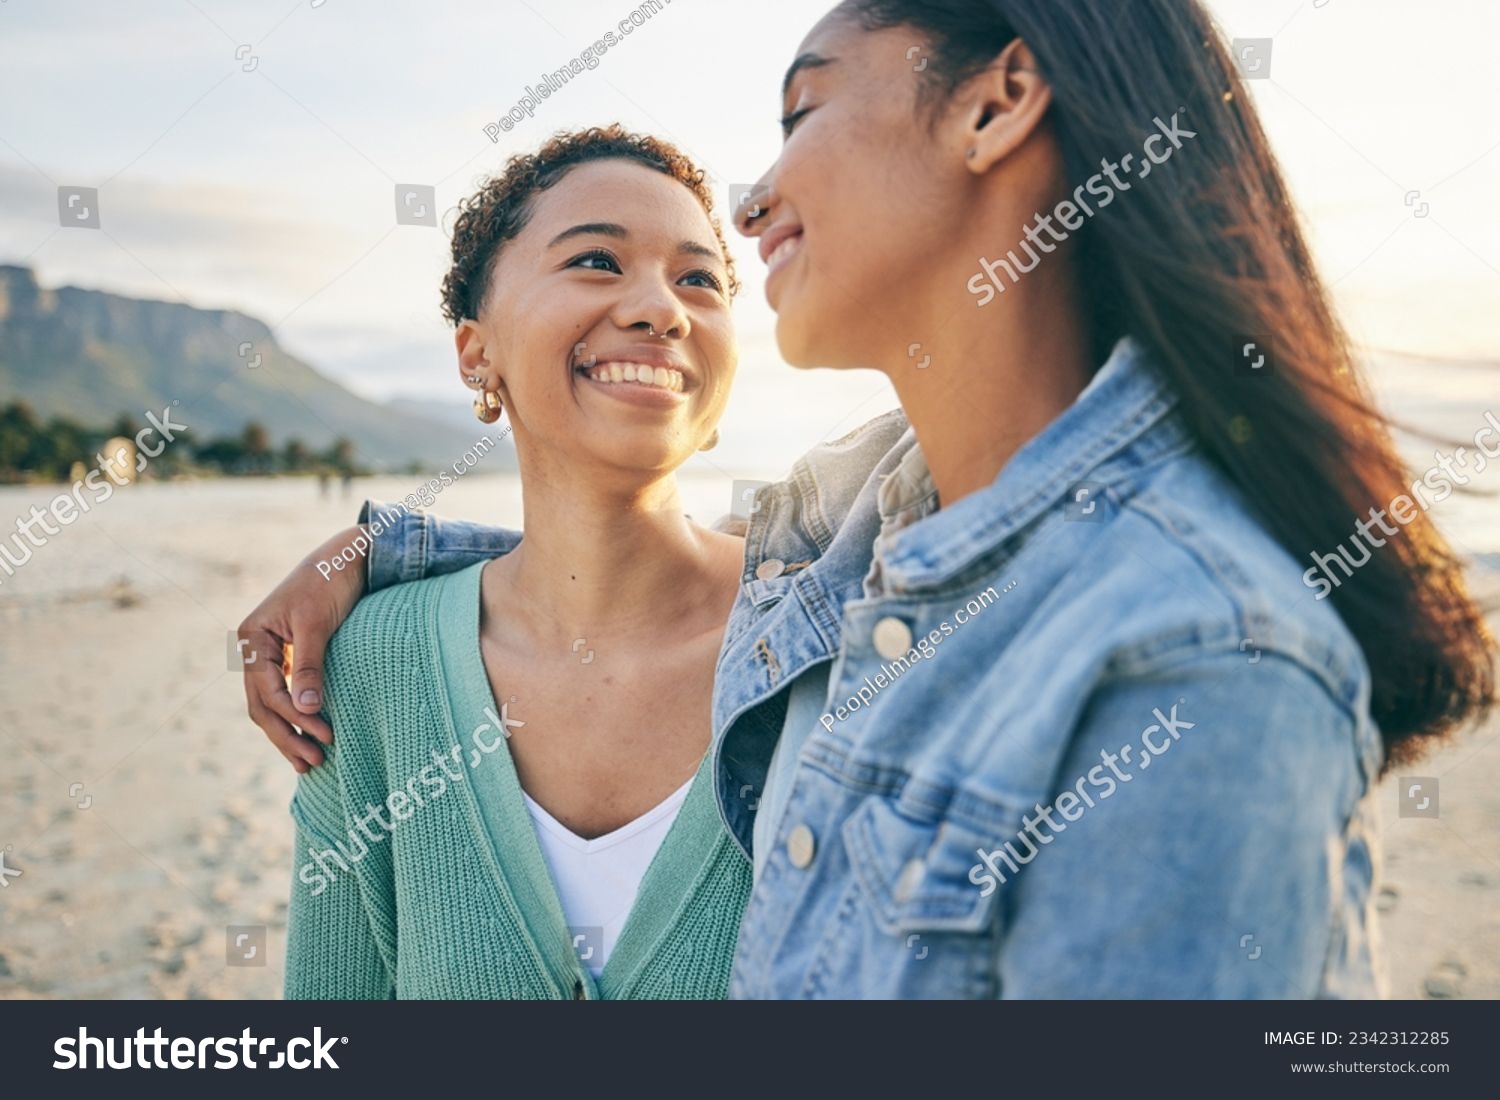 Beach, hug and queer couple with love, lgbtq and happiness with marriage, sunset or adventure. Lesbian, female people or women on a seaside holiday, vacation or quality time with a journey or embrace #2342312285